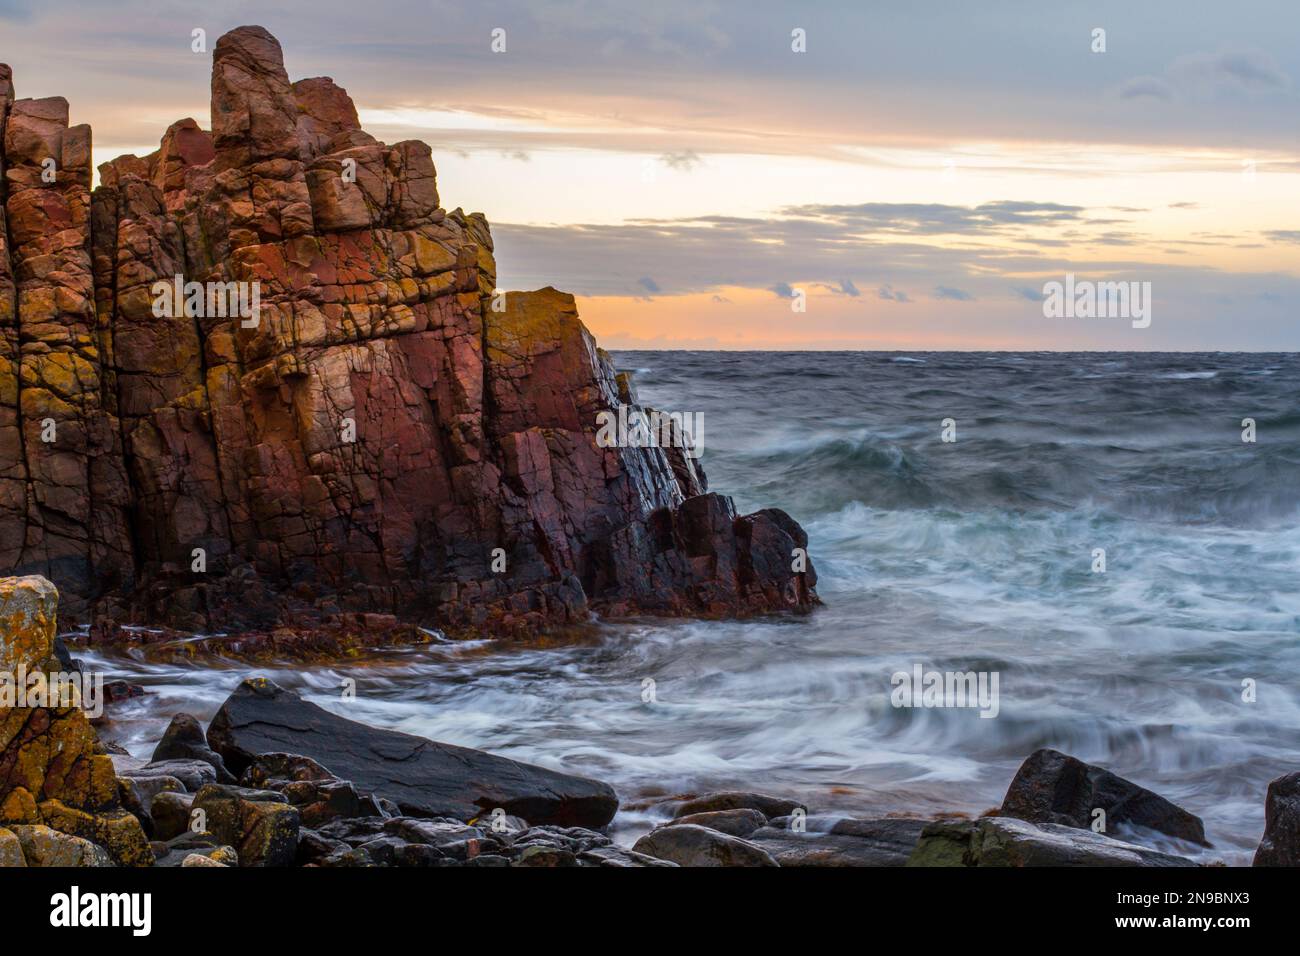 A huge rocky cliff on the coast of the sea in Hovs-hallar, Sweden Stock Photo